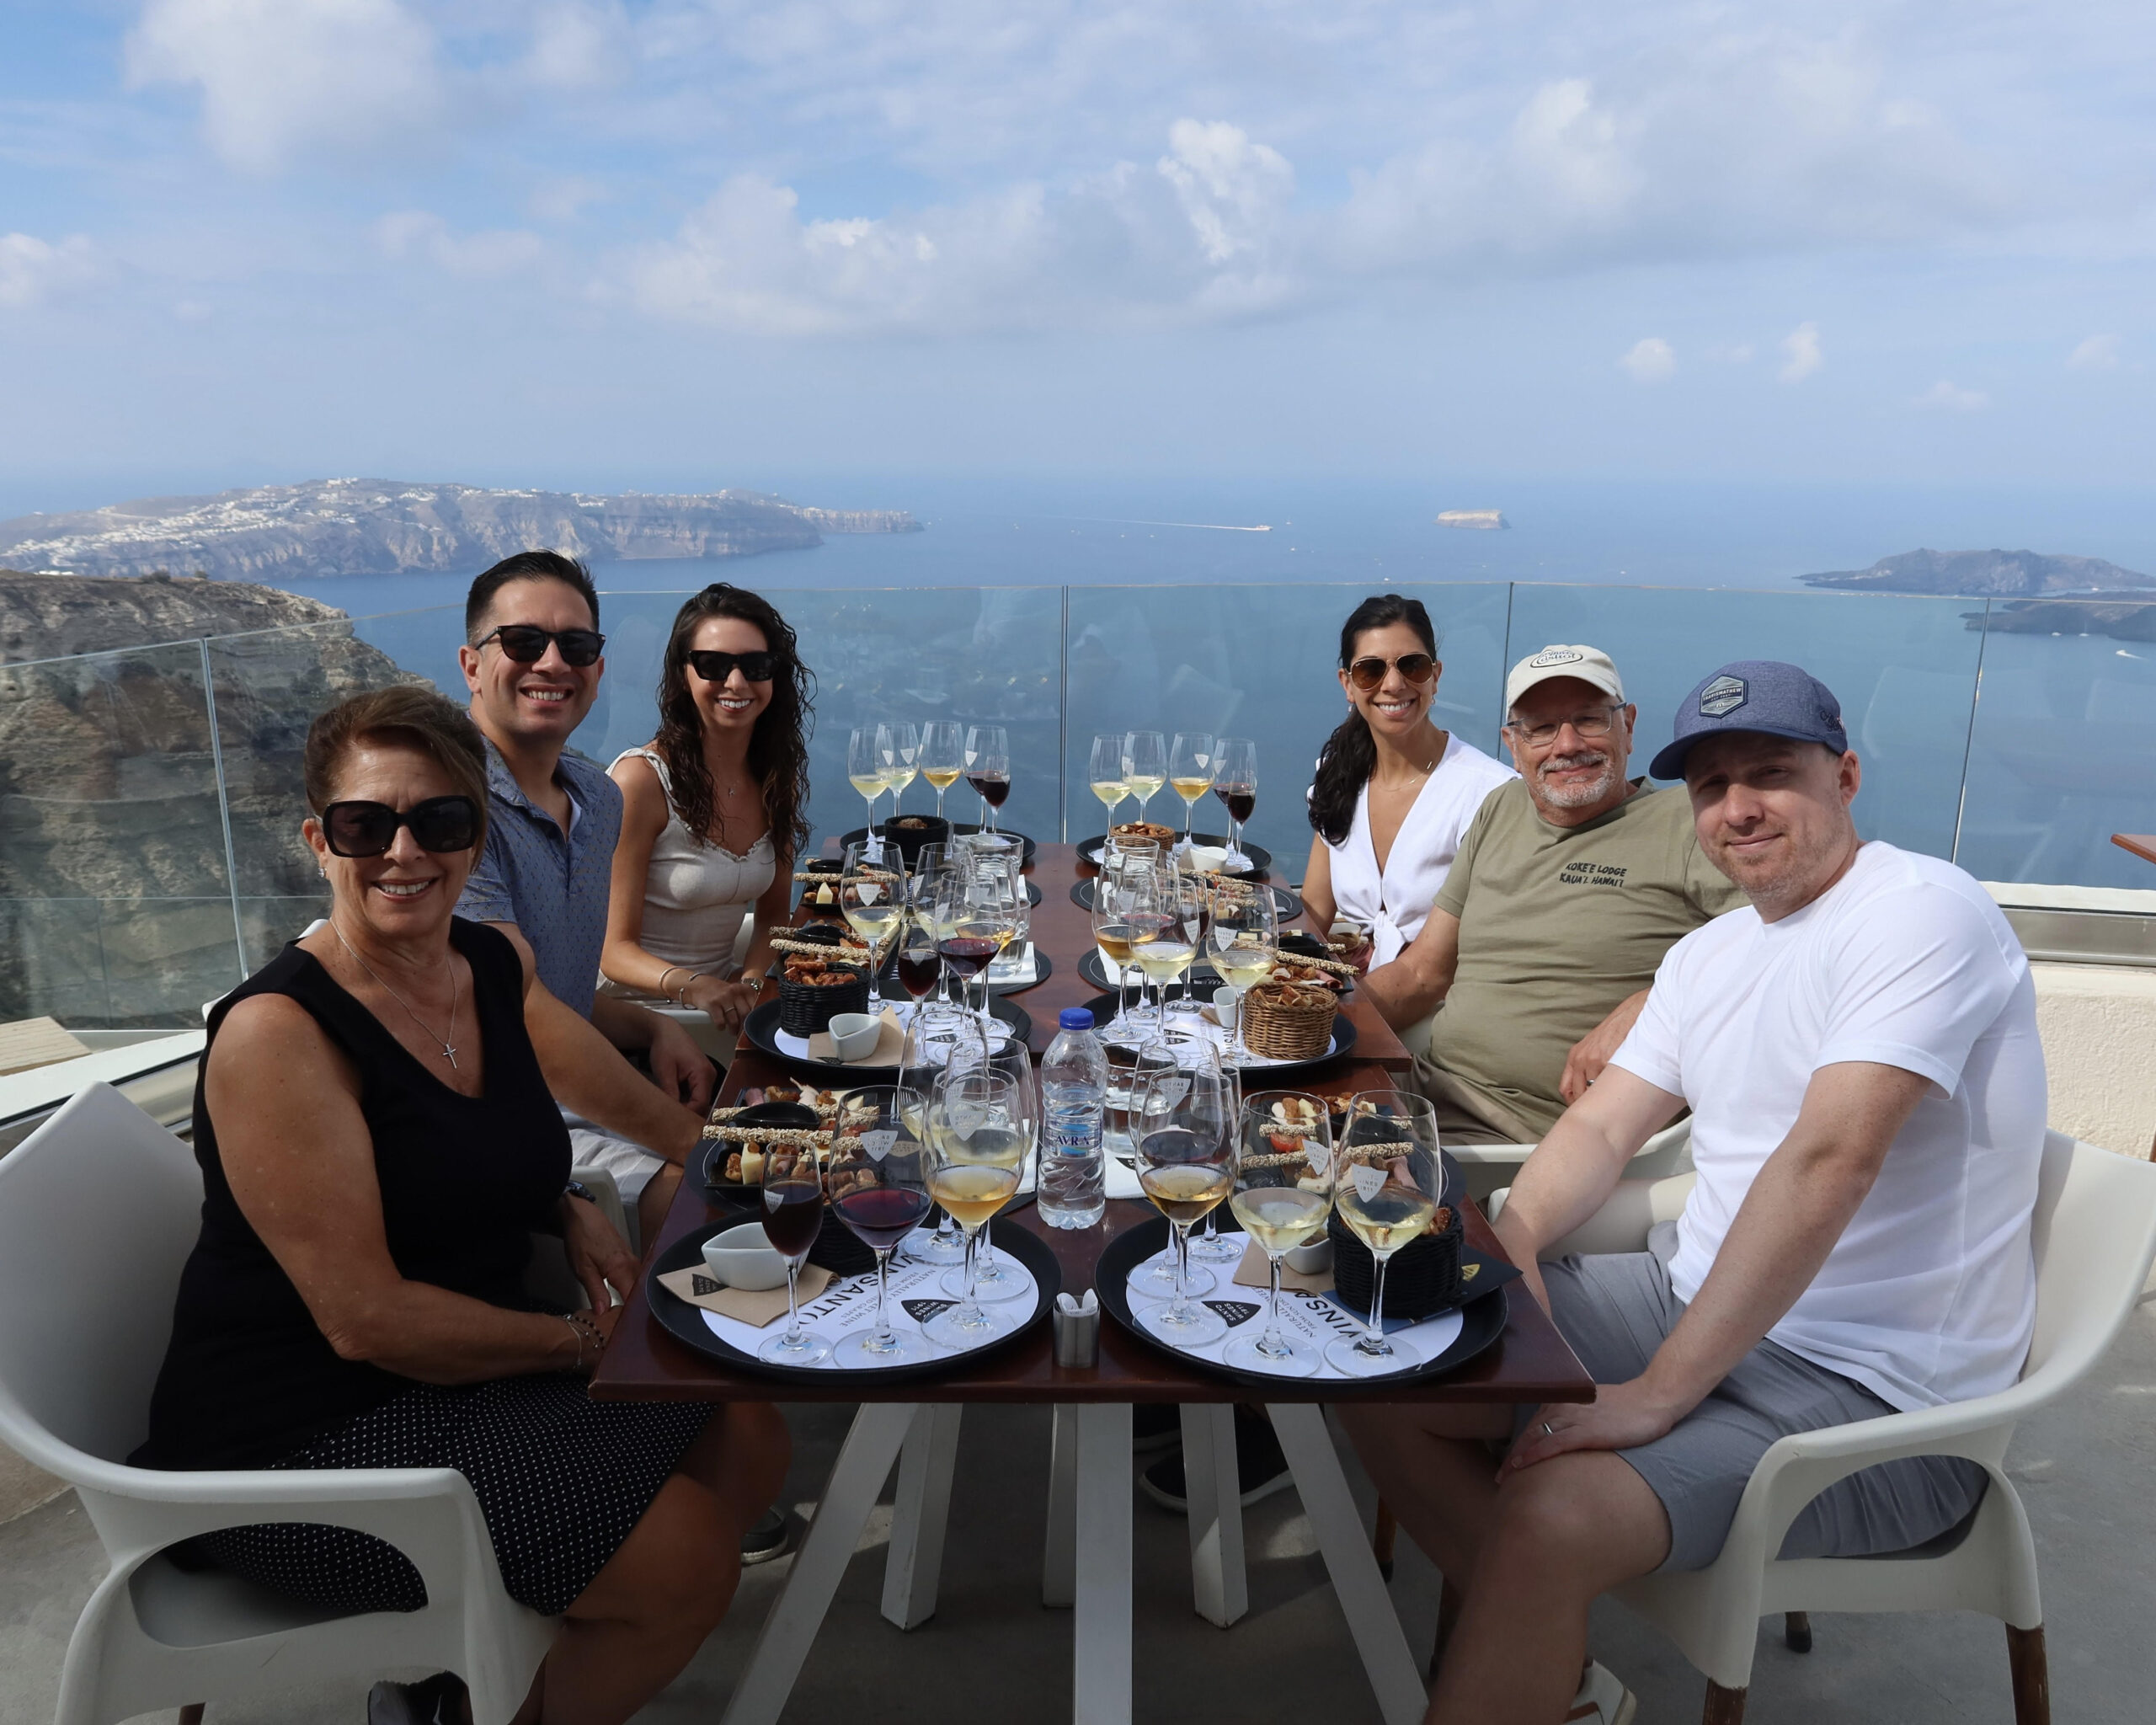 A family at a wine tasting table with views overlooking the sea in Santorini Greece